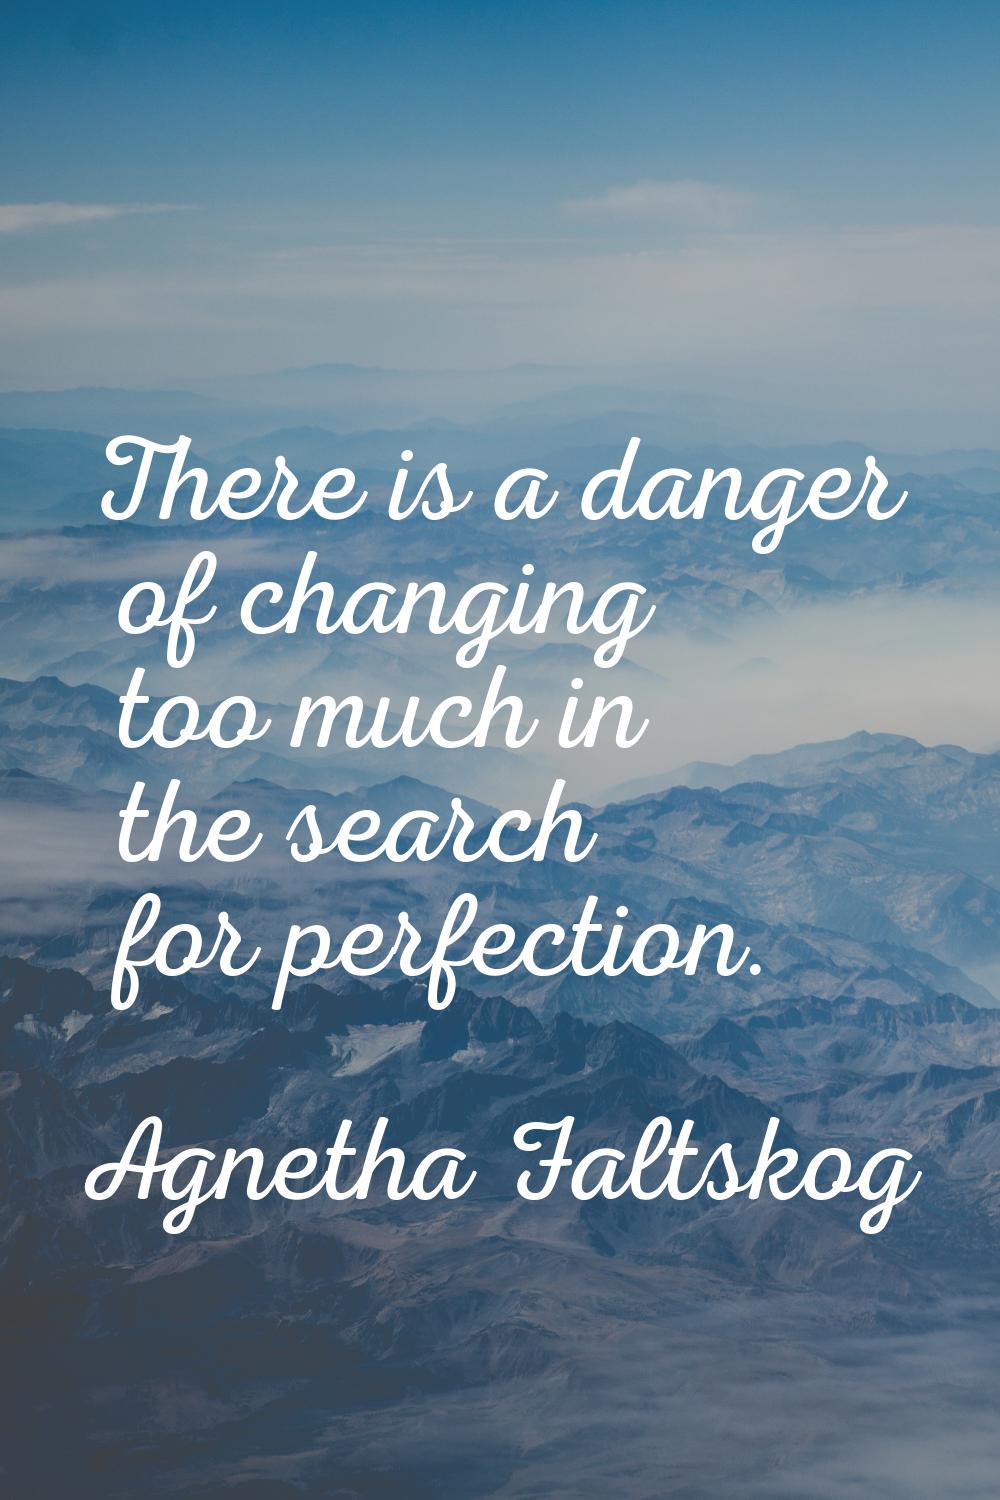 There is a danger of changing too much in the search for perfection.